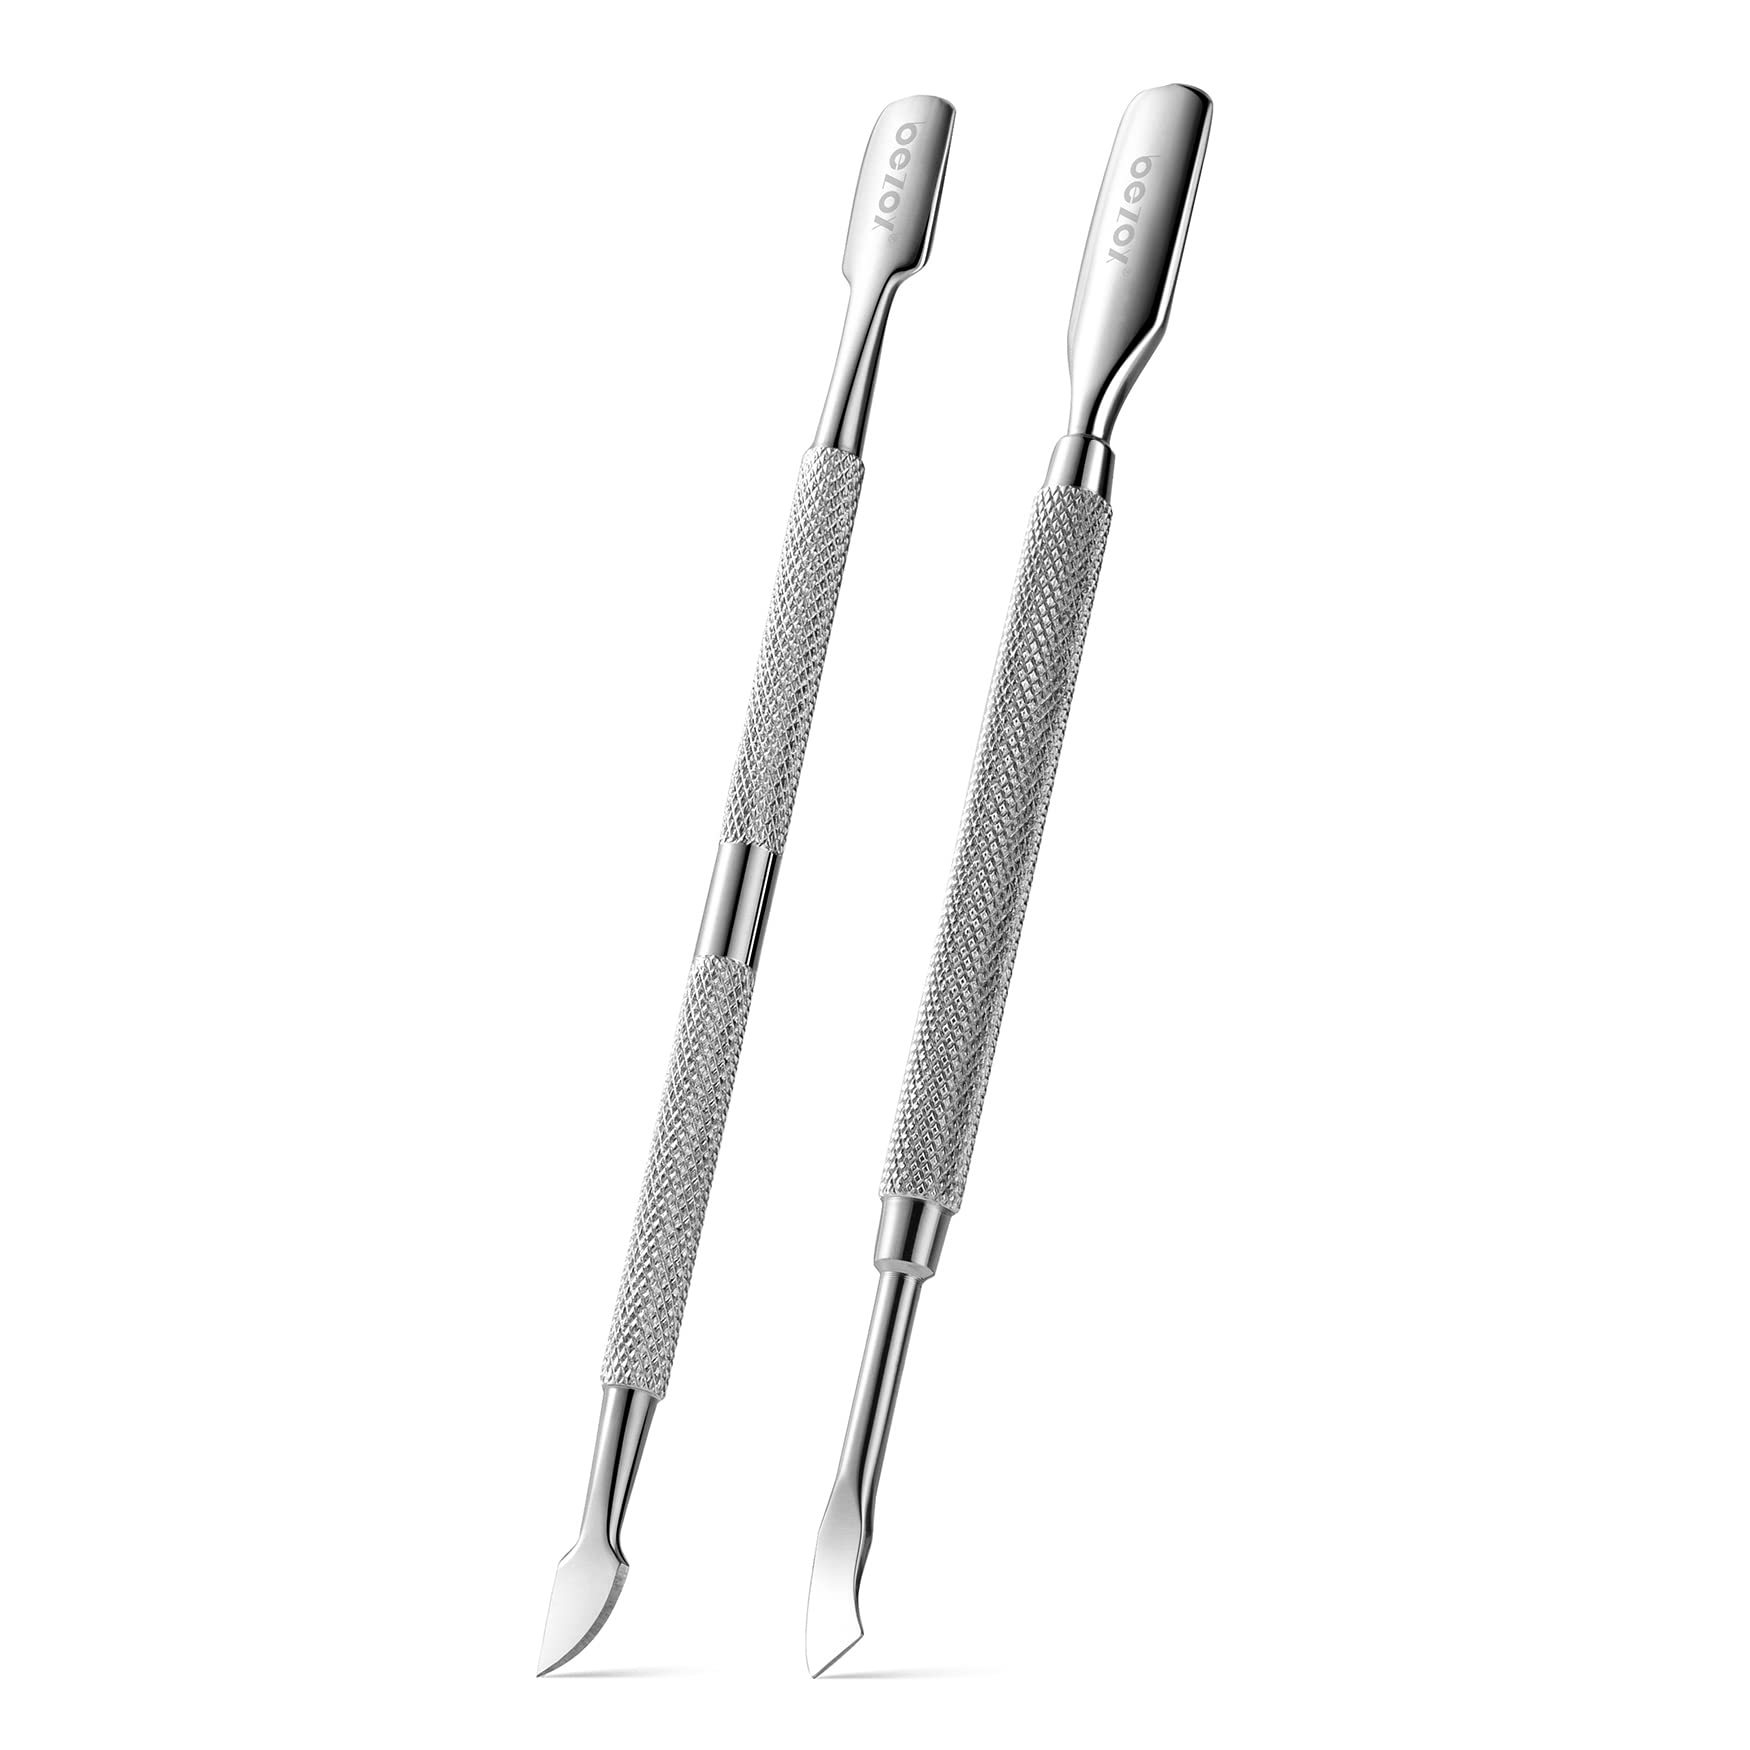 1pcs Dual-end Stainless Steel Nail Cuticle Pusher Spoon Remover Trimmer  Dead Skin Manicure Pedicure Cleaner Nail Tool Ji34-43 - Cuticle Pushers -  AliExpress